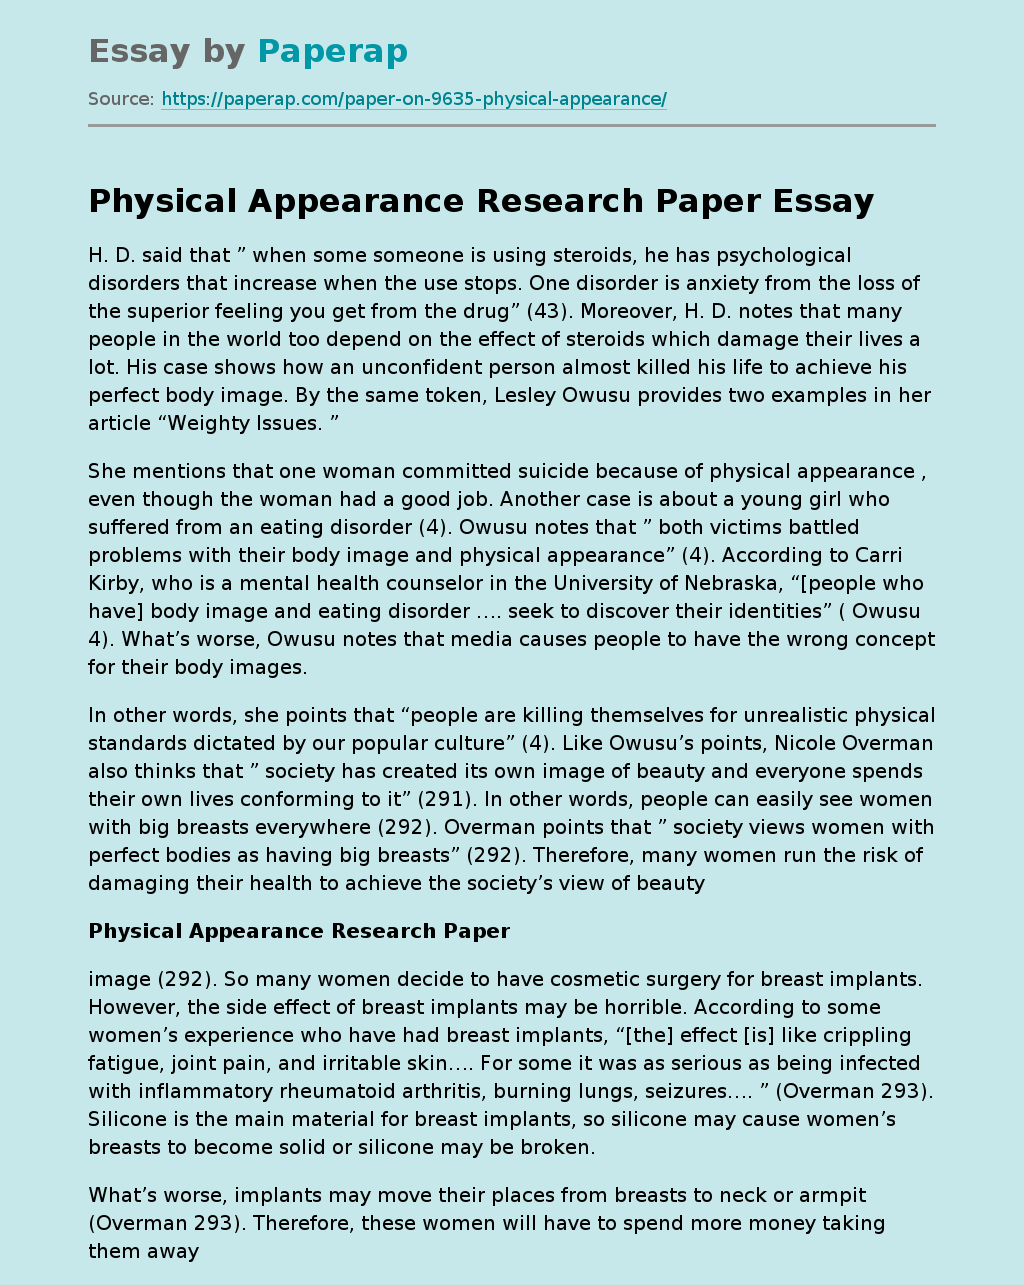 Physical Appearance Research Paper